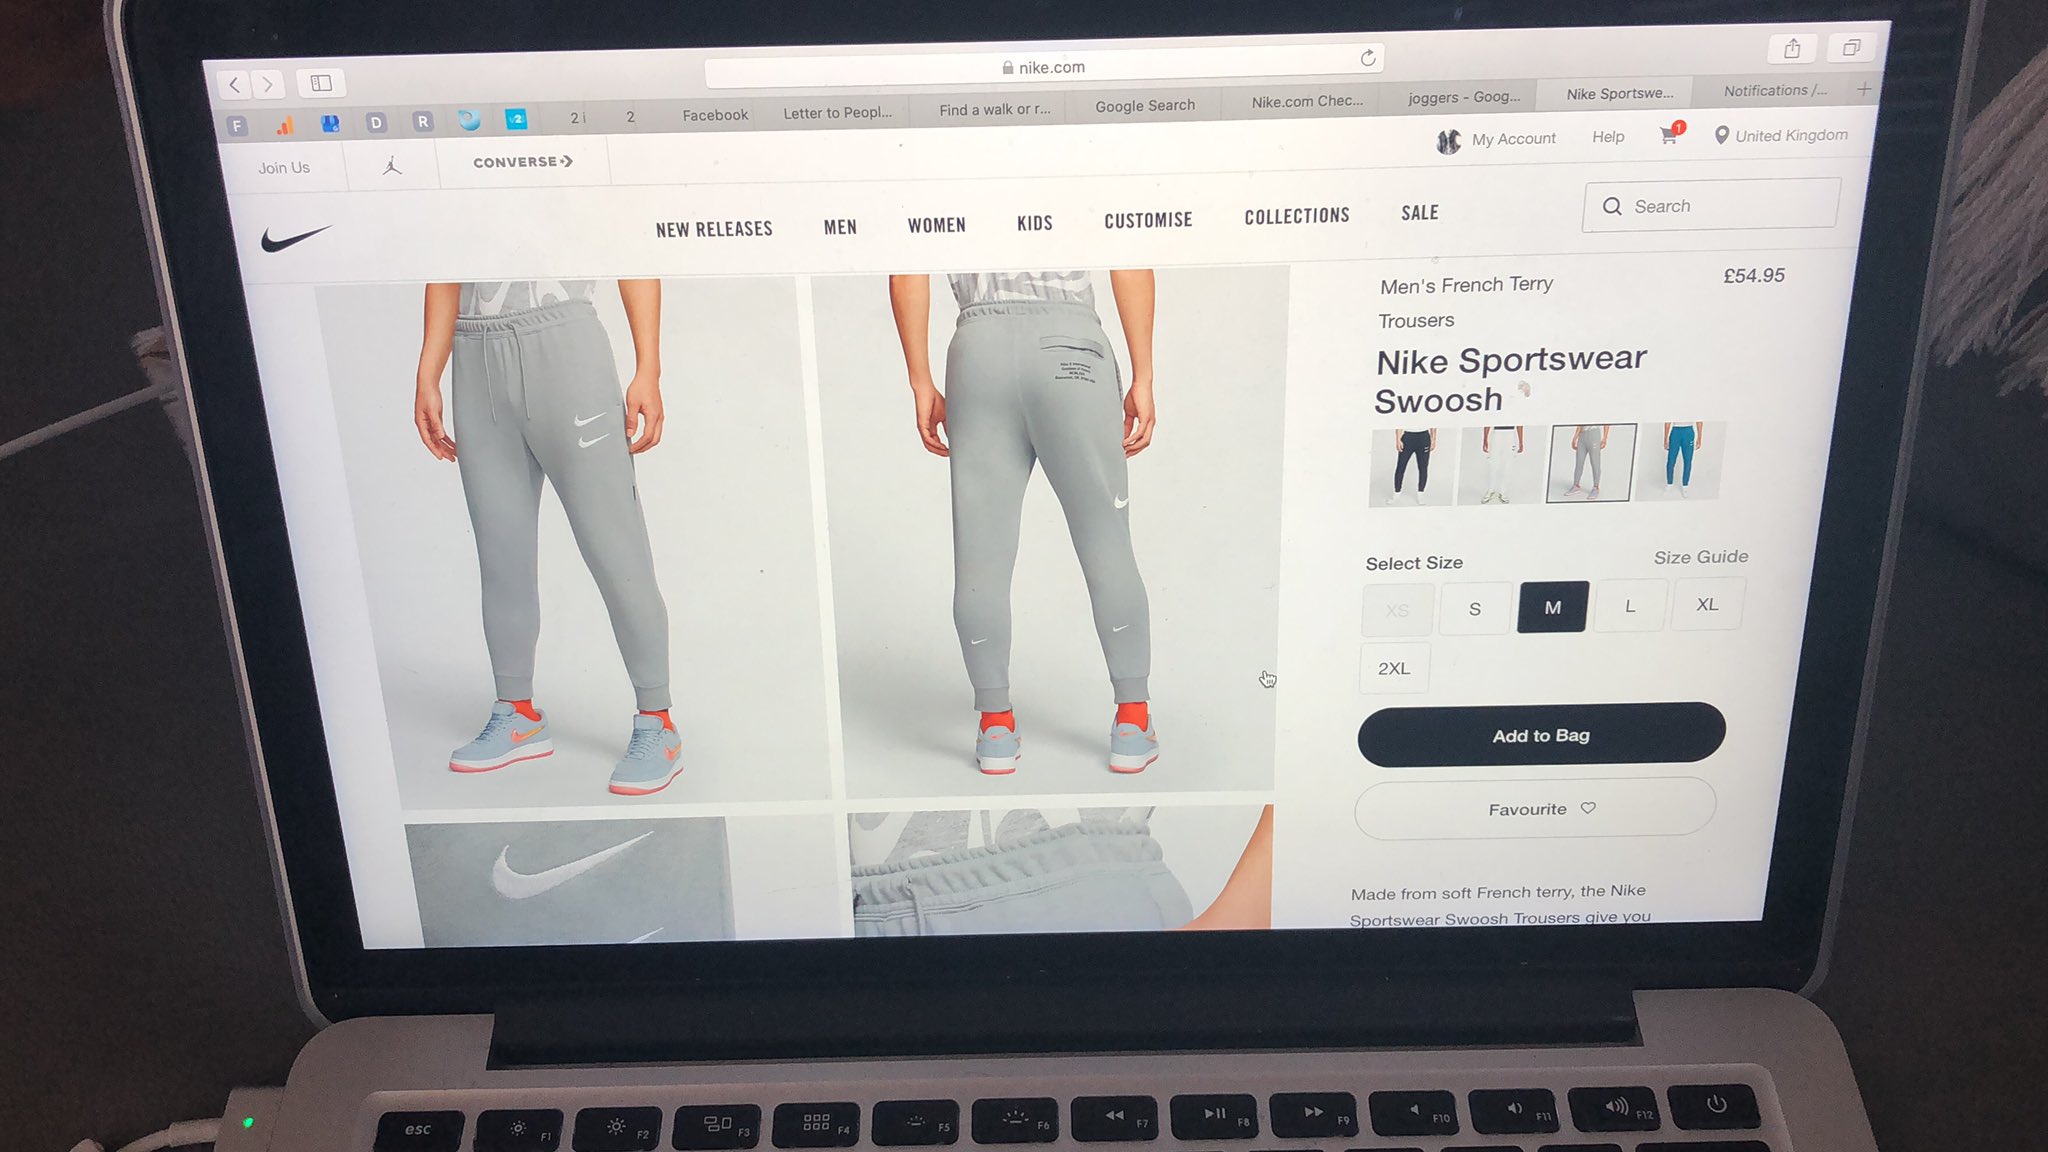 Nike.com on Twitter: "@LauraMiaFinlay Hey there. Do you have a screenshot the error you see? What is the style number for those joggers?" / Twitter